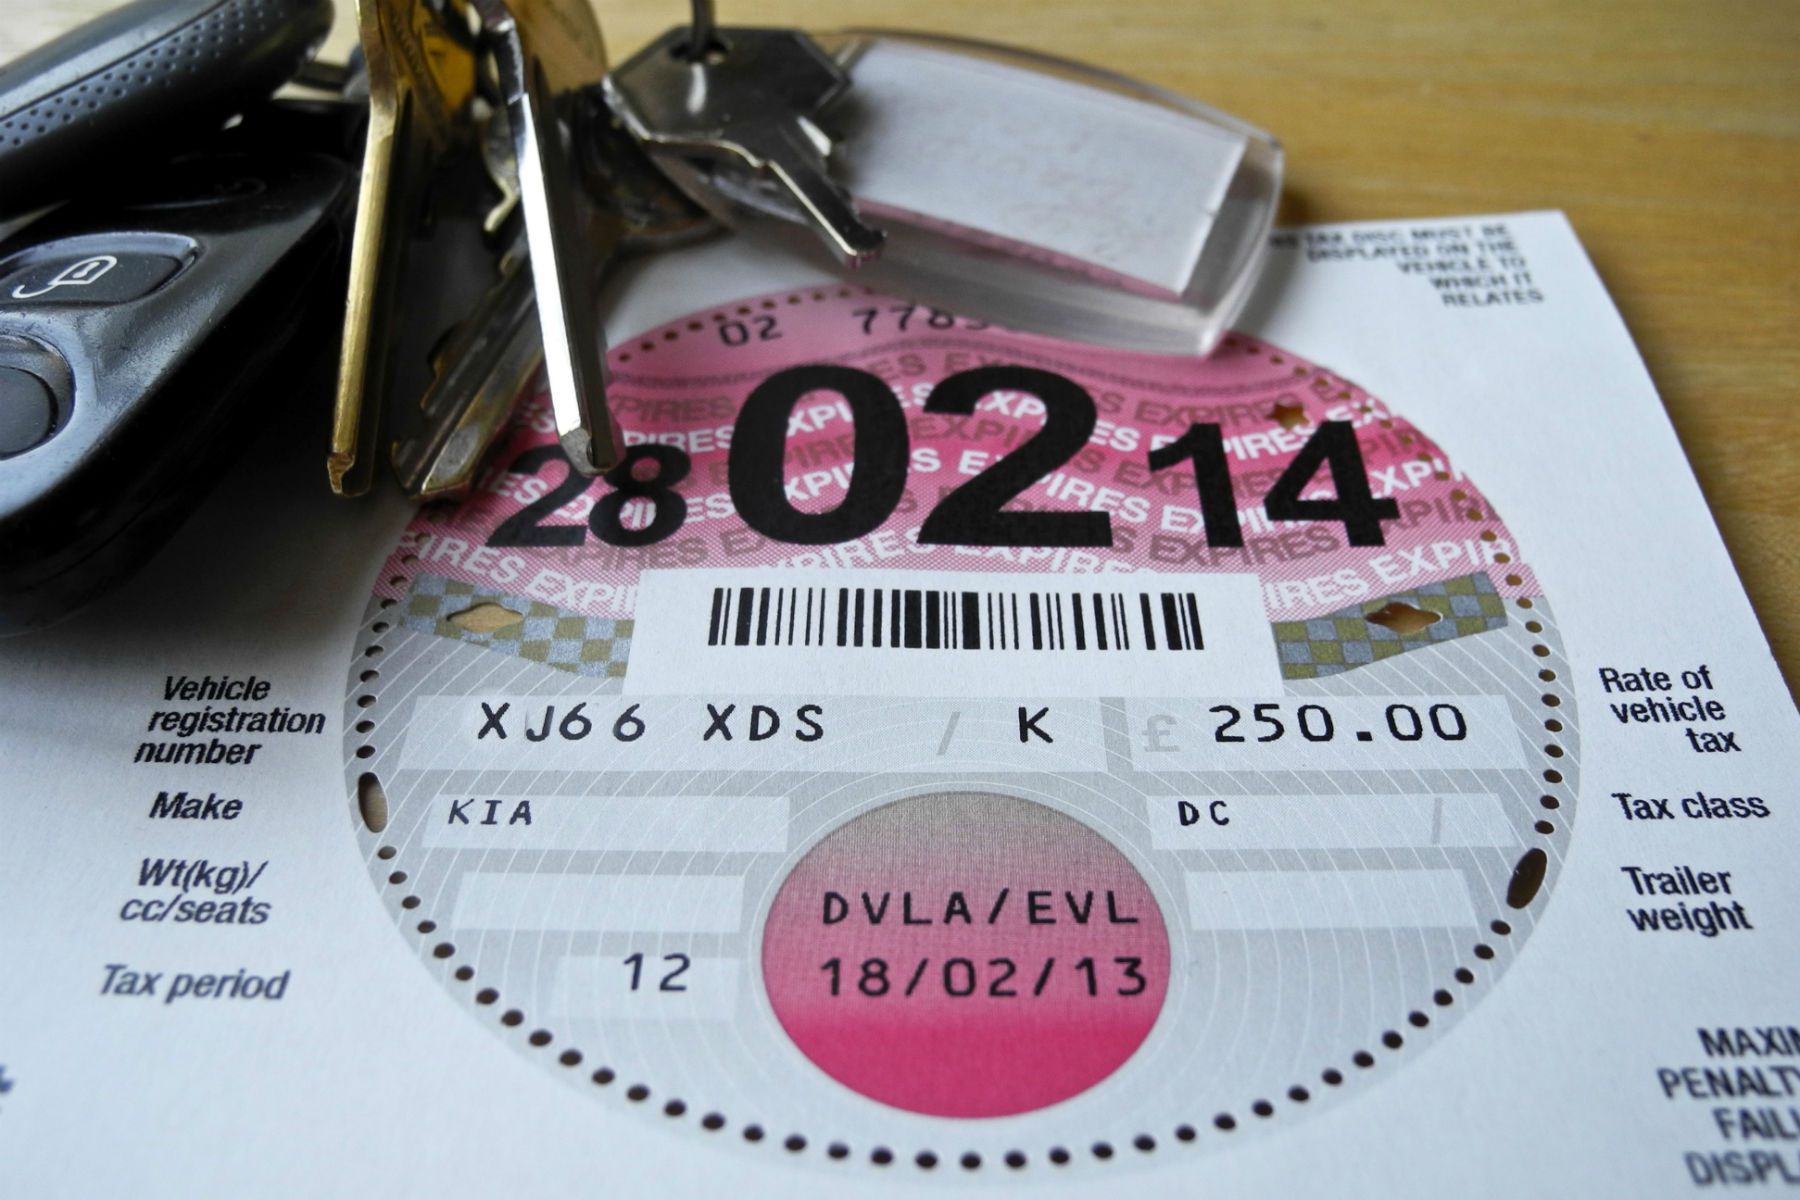 dvla-loses-93-million-after-paper-tax-disc-scrapped-motoring-research